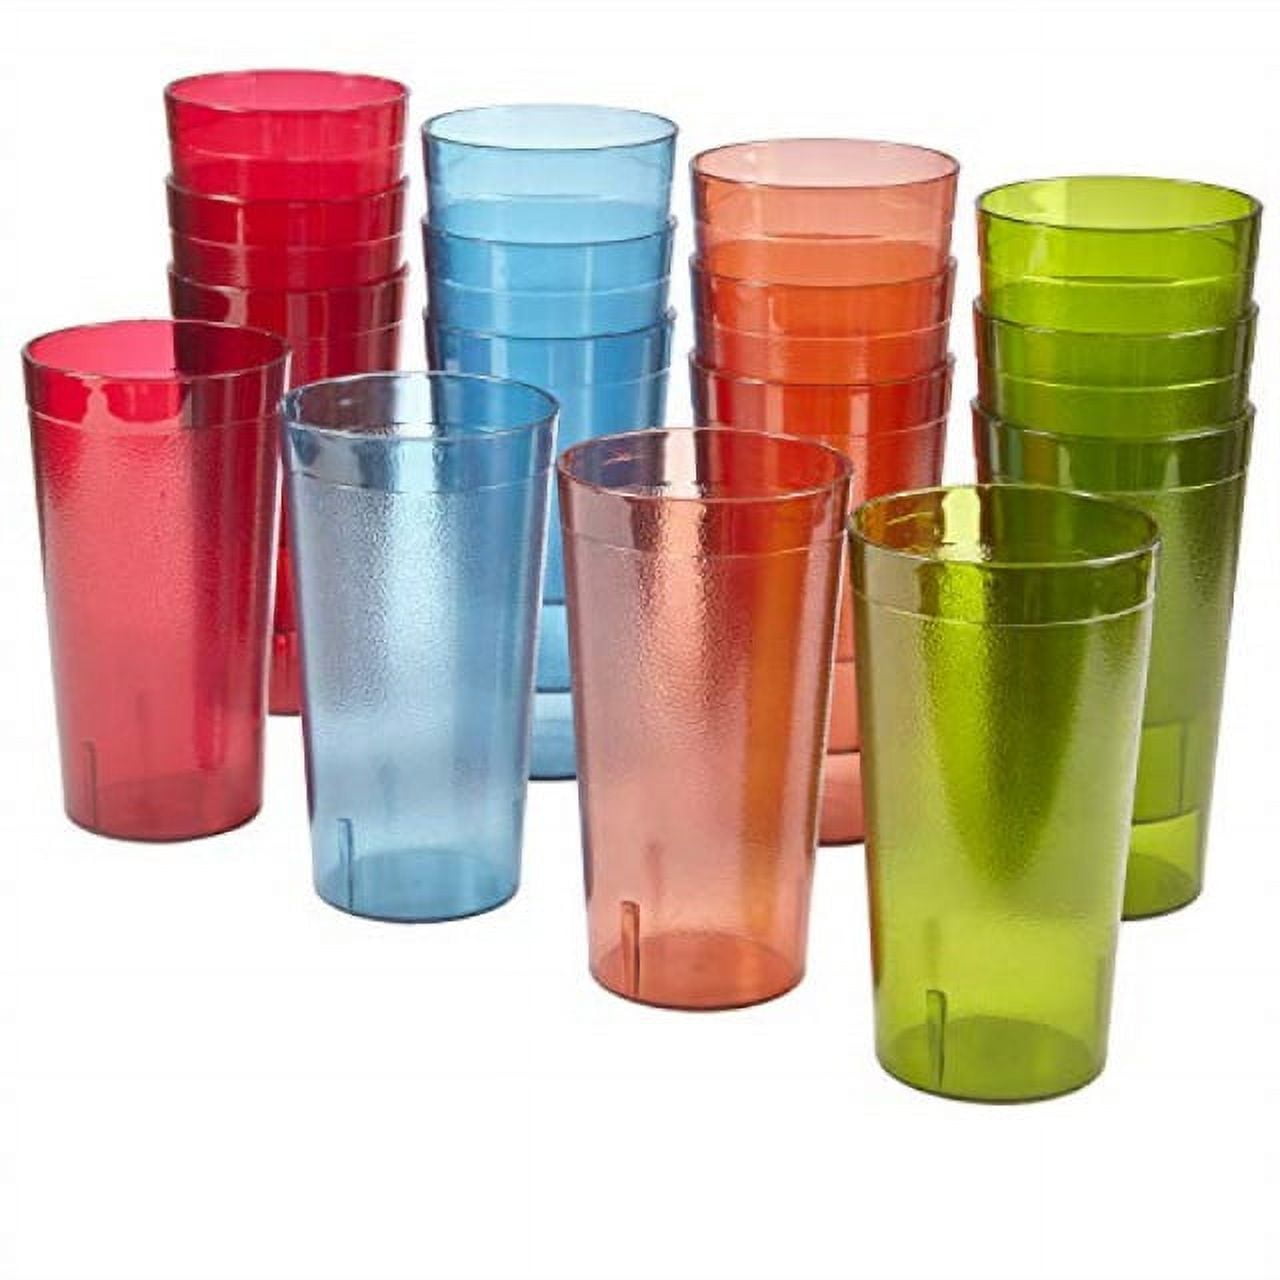 Drinking Glasses Beverage Tumblers Resistant Plastic Clear 32 Oz New Set Of  12